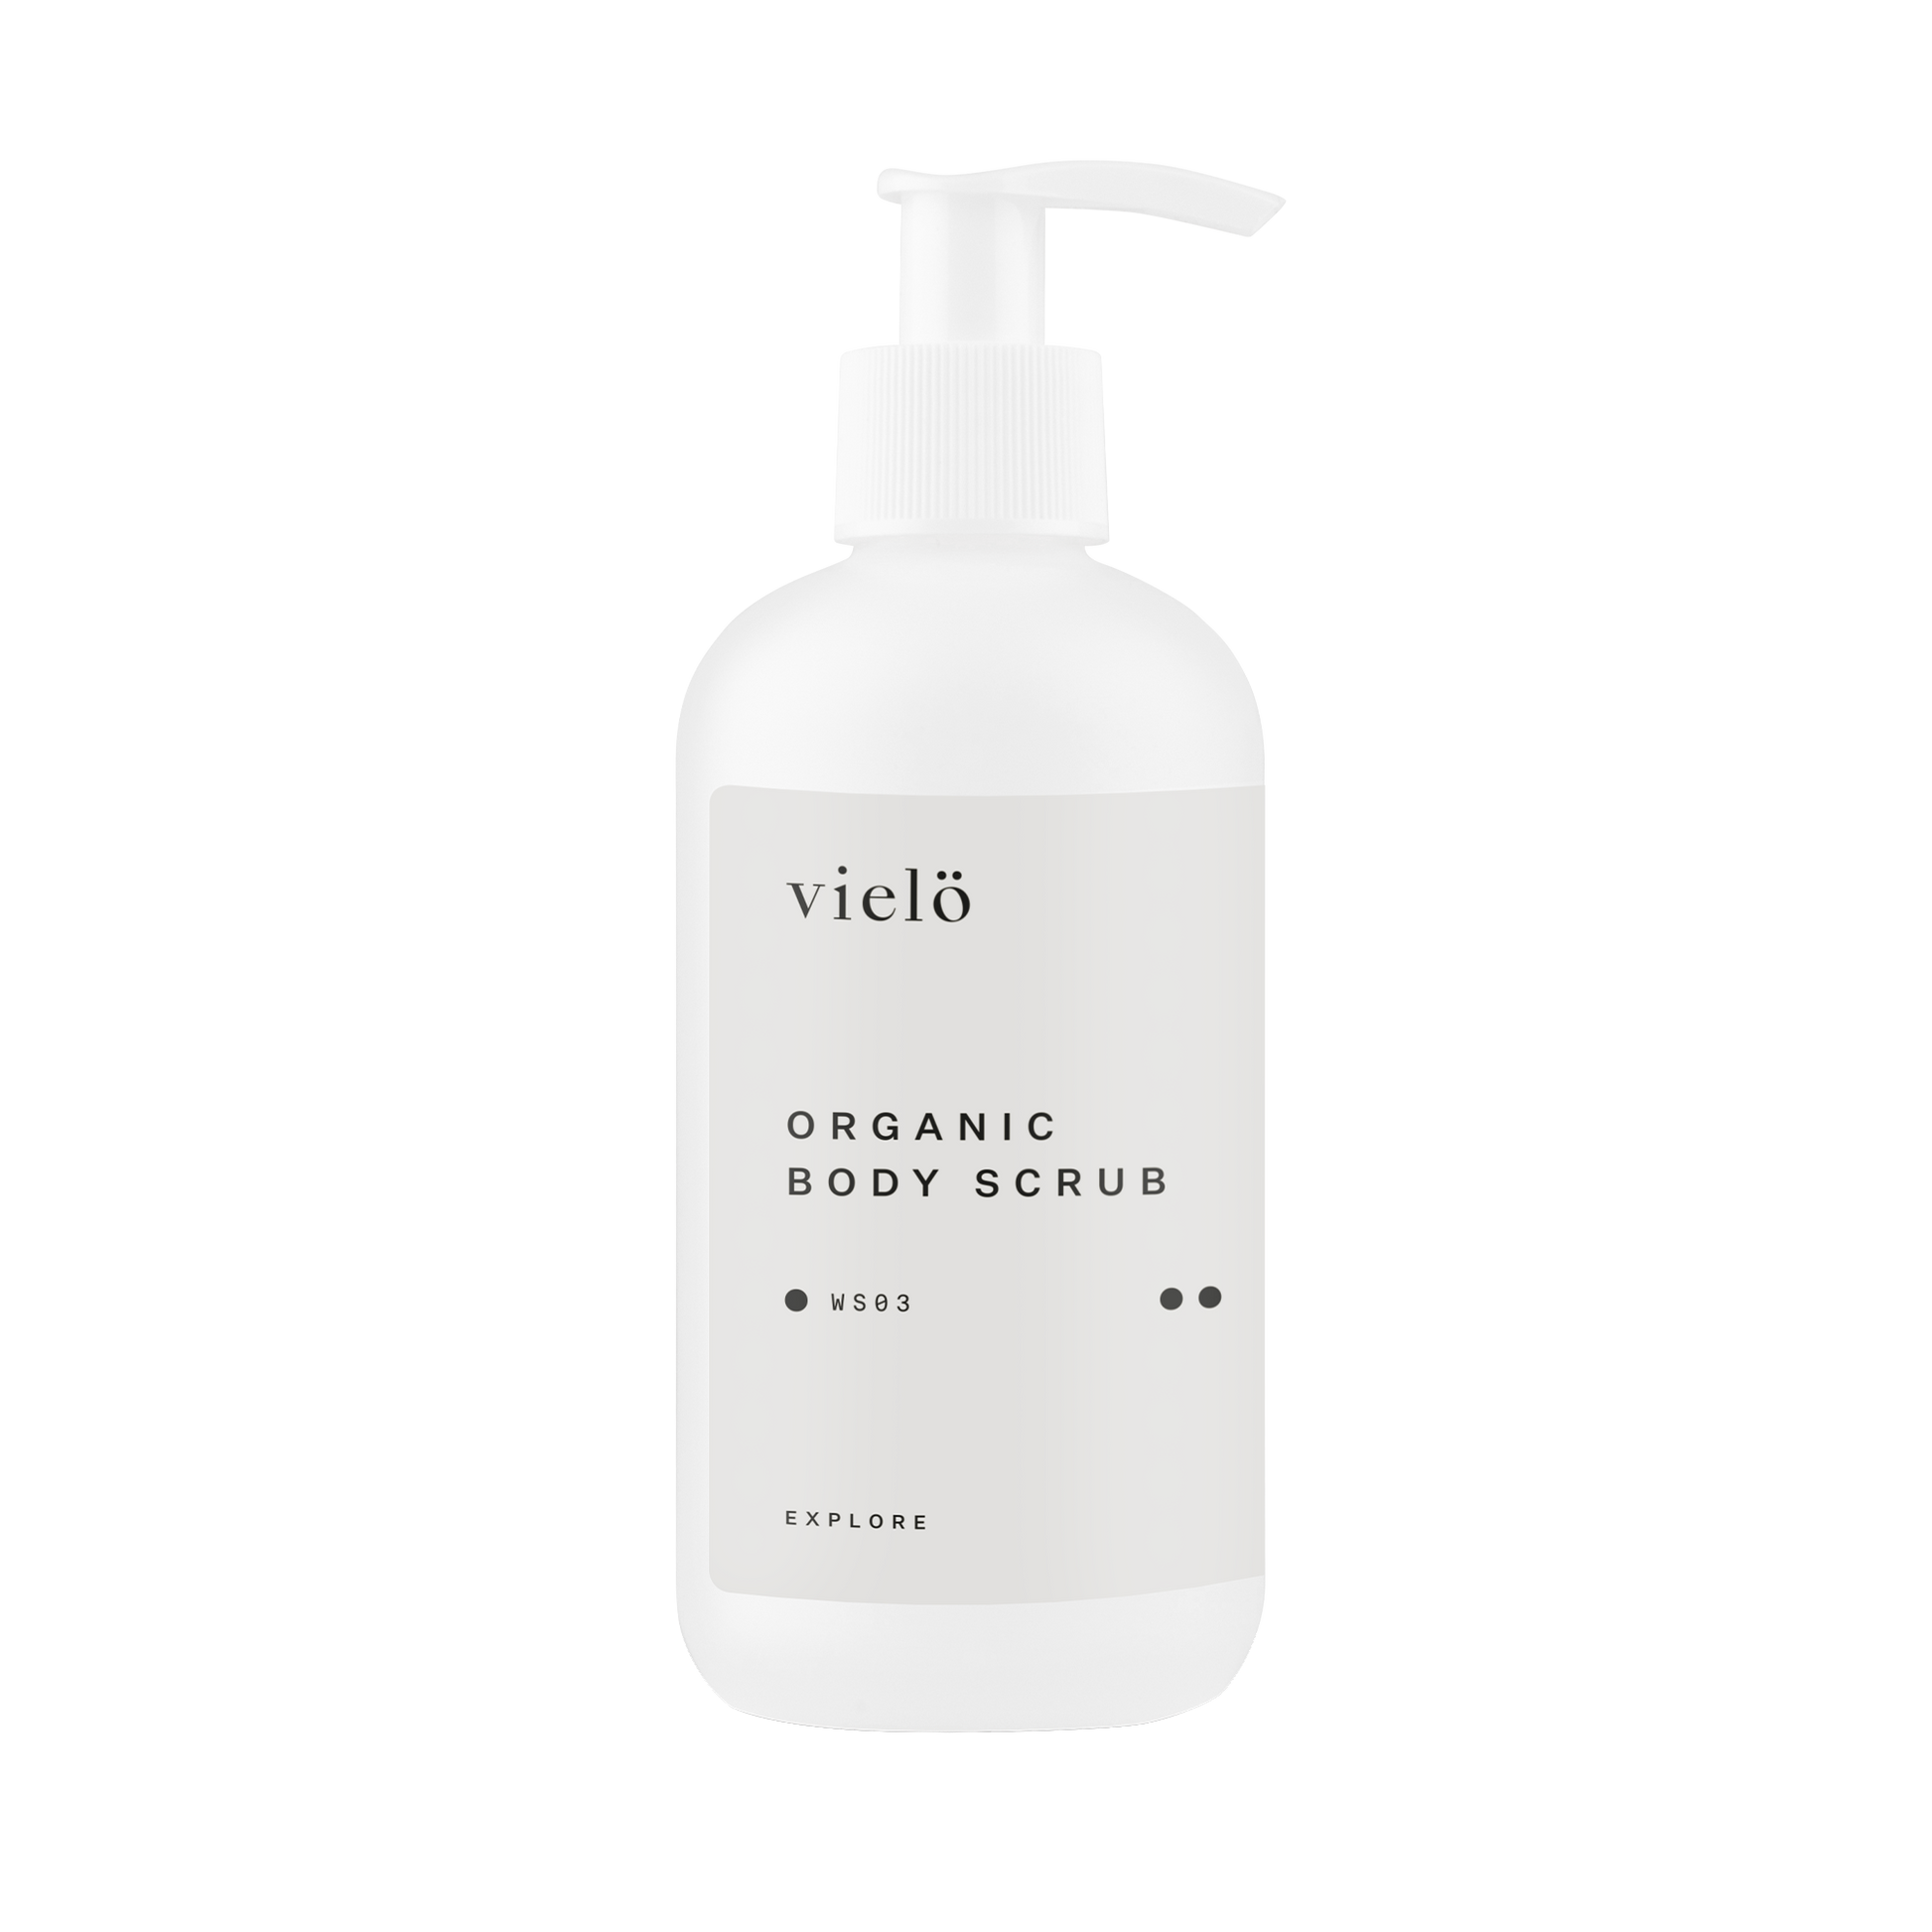 Vielo Organic Body Scrub: Nourishing organic body scrub, specially designed to cleanse and exfoliate the skin gently, to remove dead skin cells and revitalize your body. Suitable for all skin types.